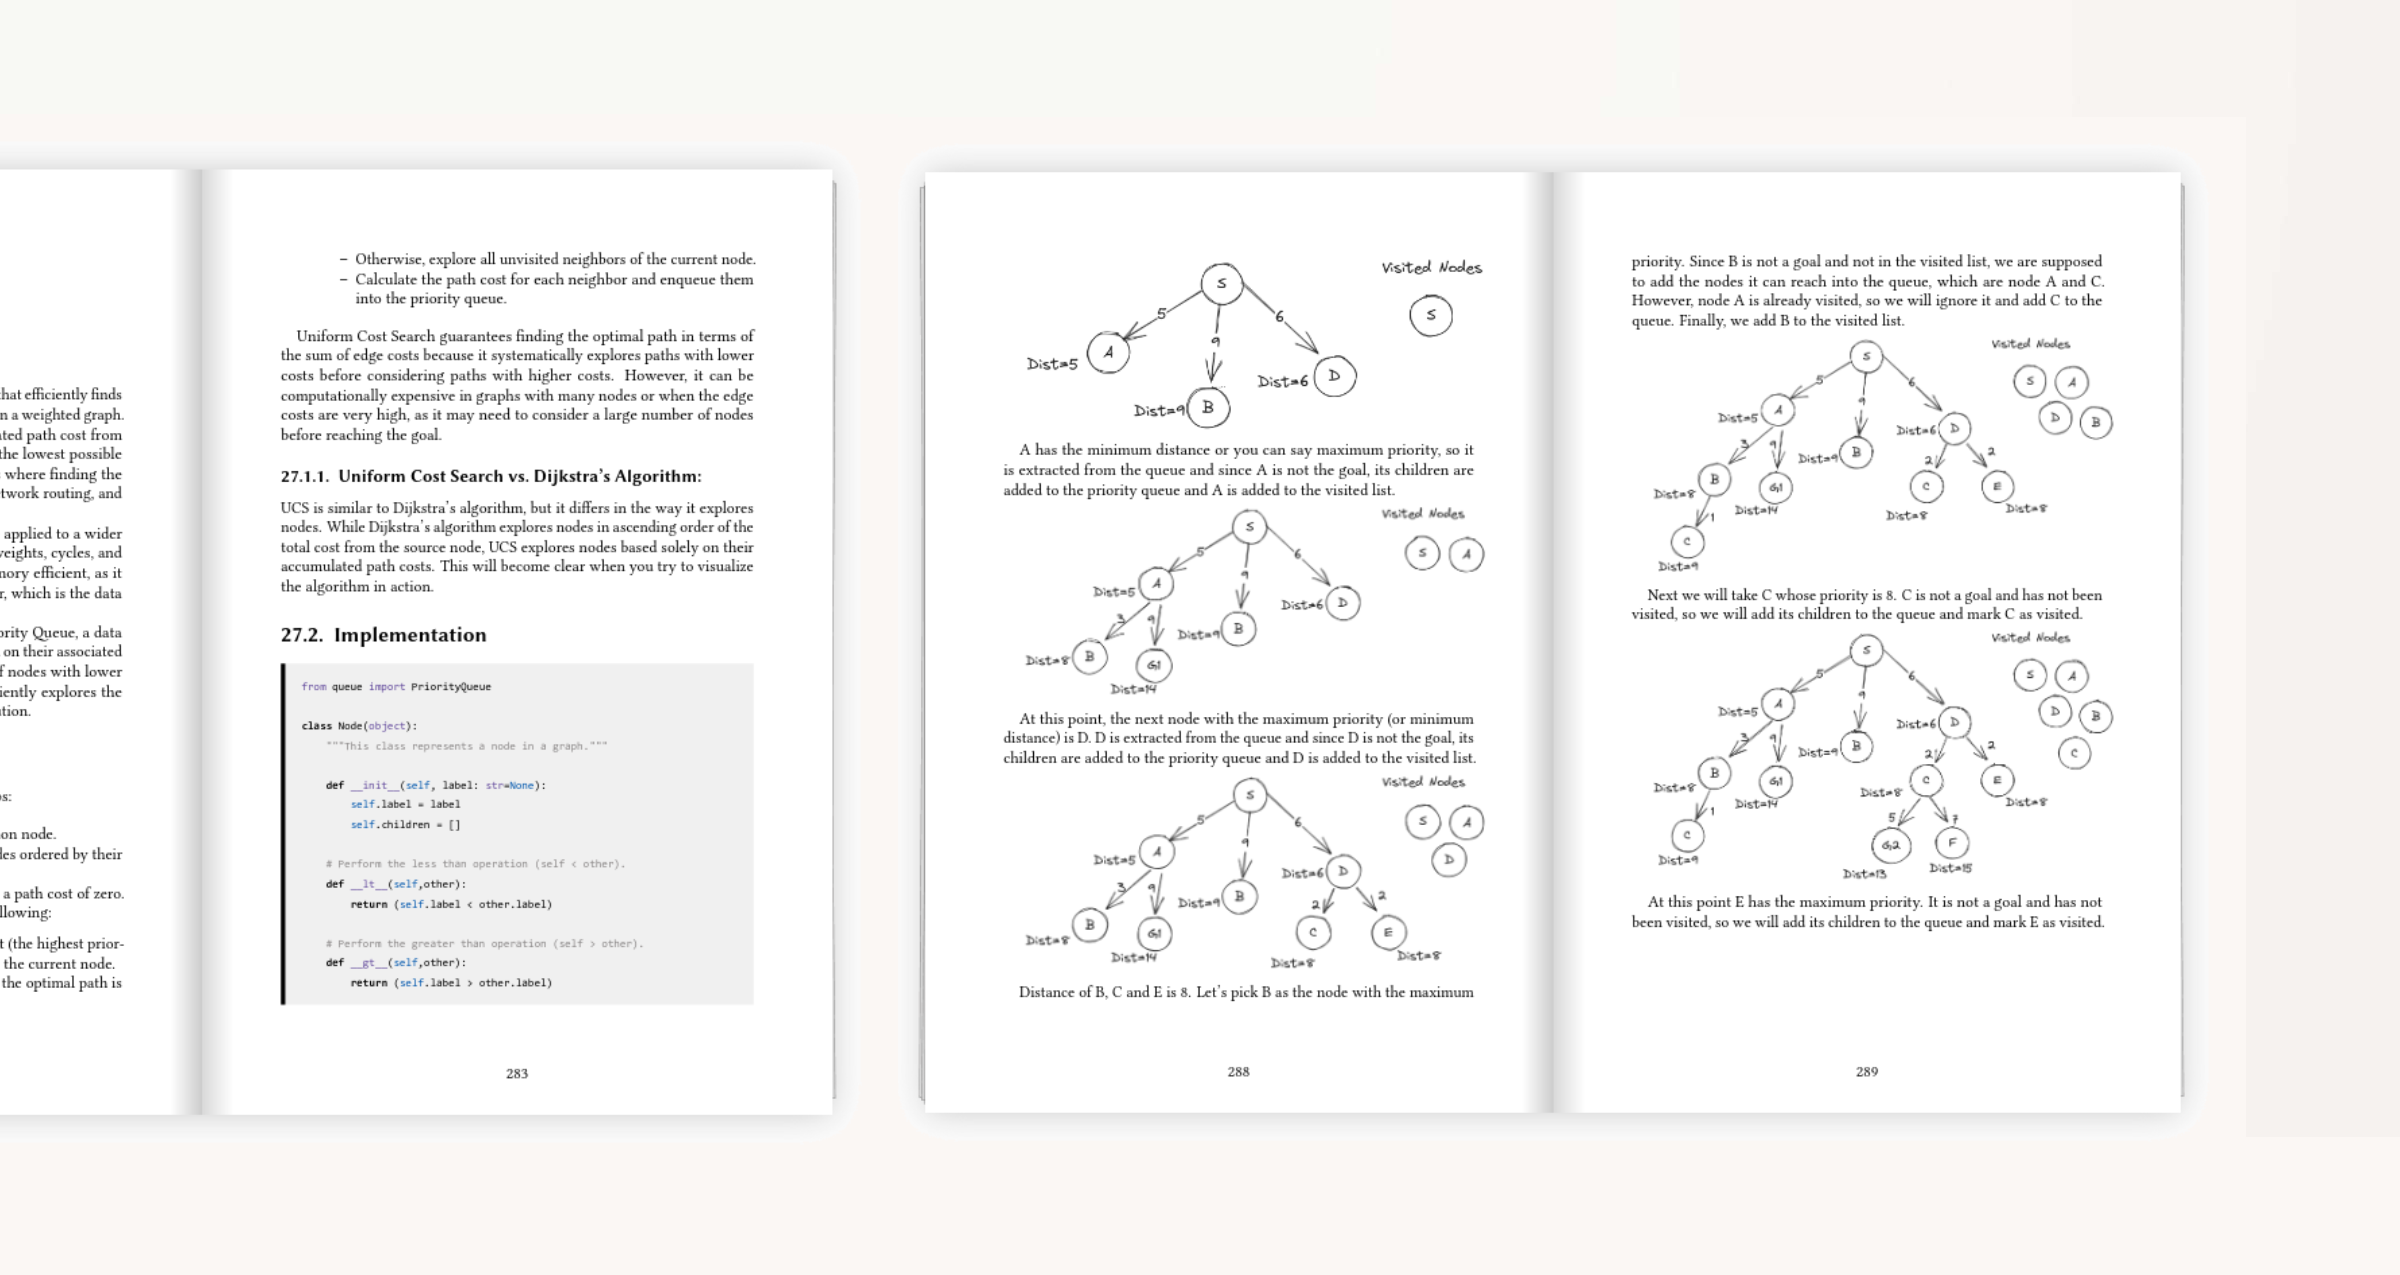 A design systems book spread showing content related to creating digital brand guidelines including brand tone of voice and copywriting